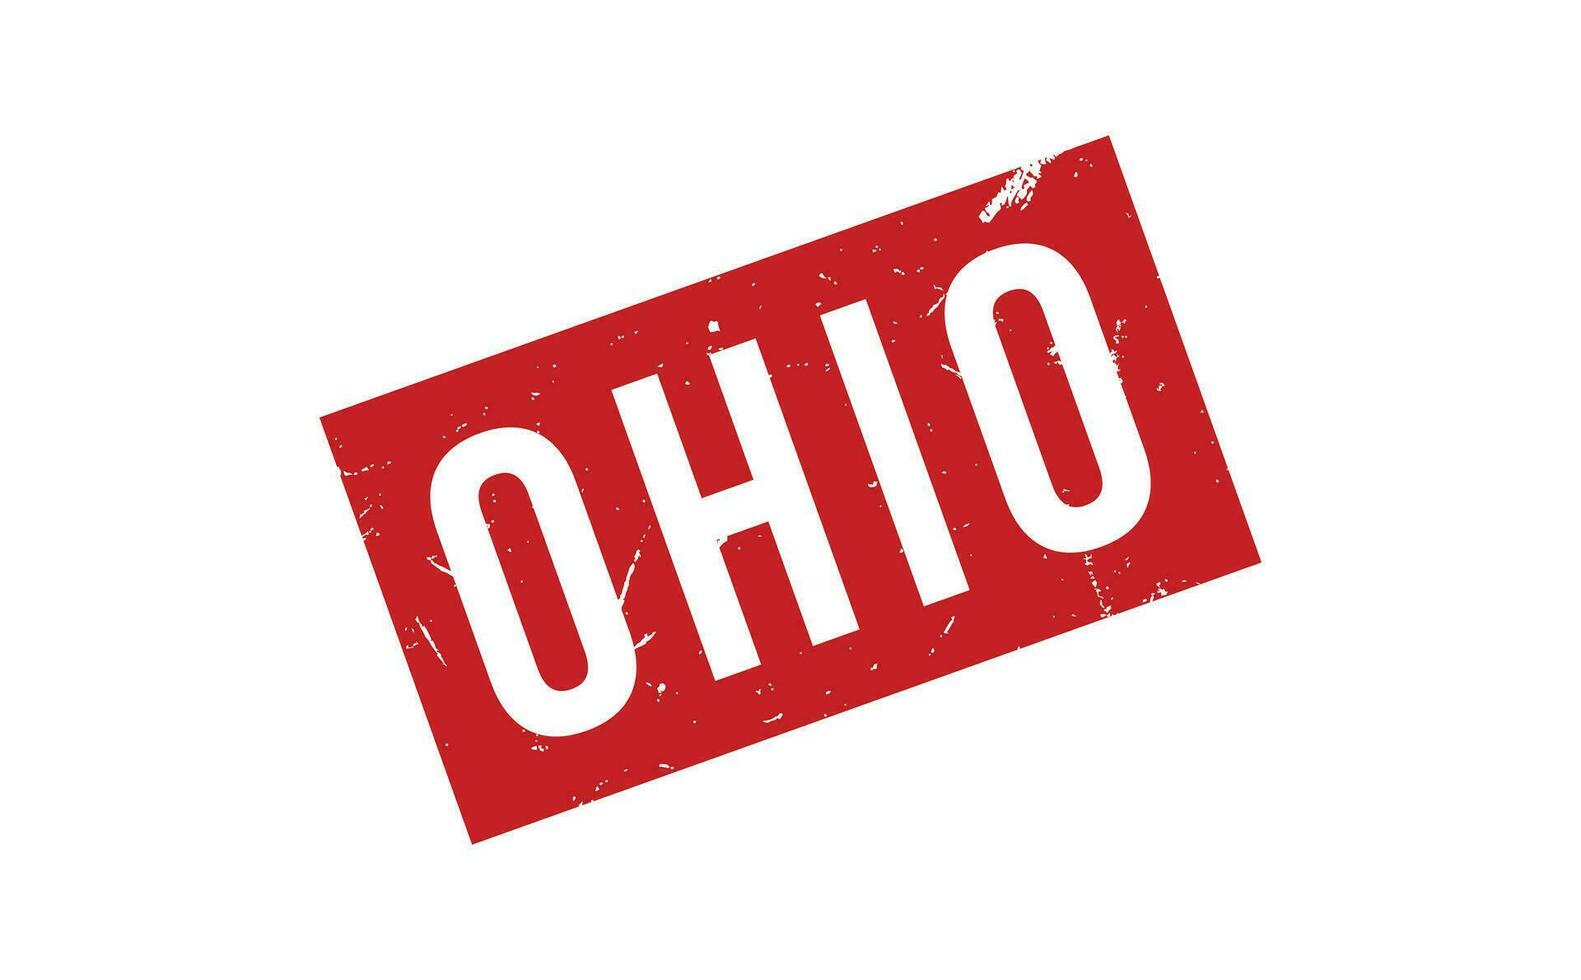 Ohio Rubber Stamp Seal Vector